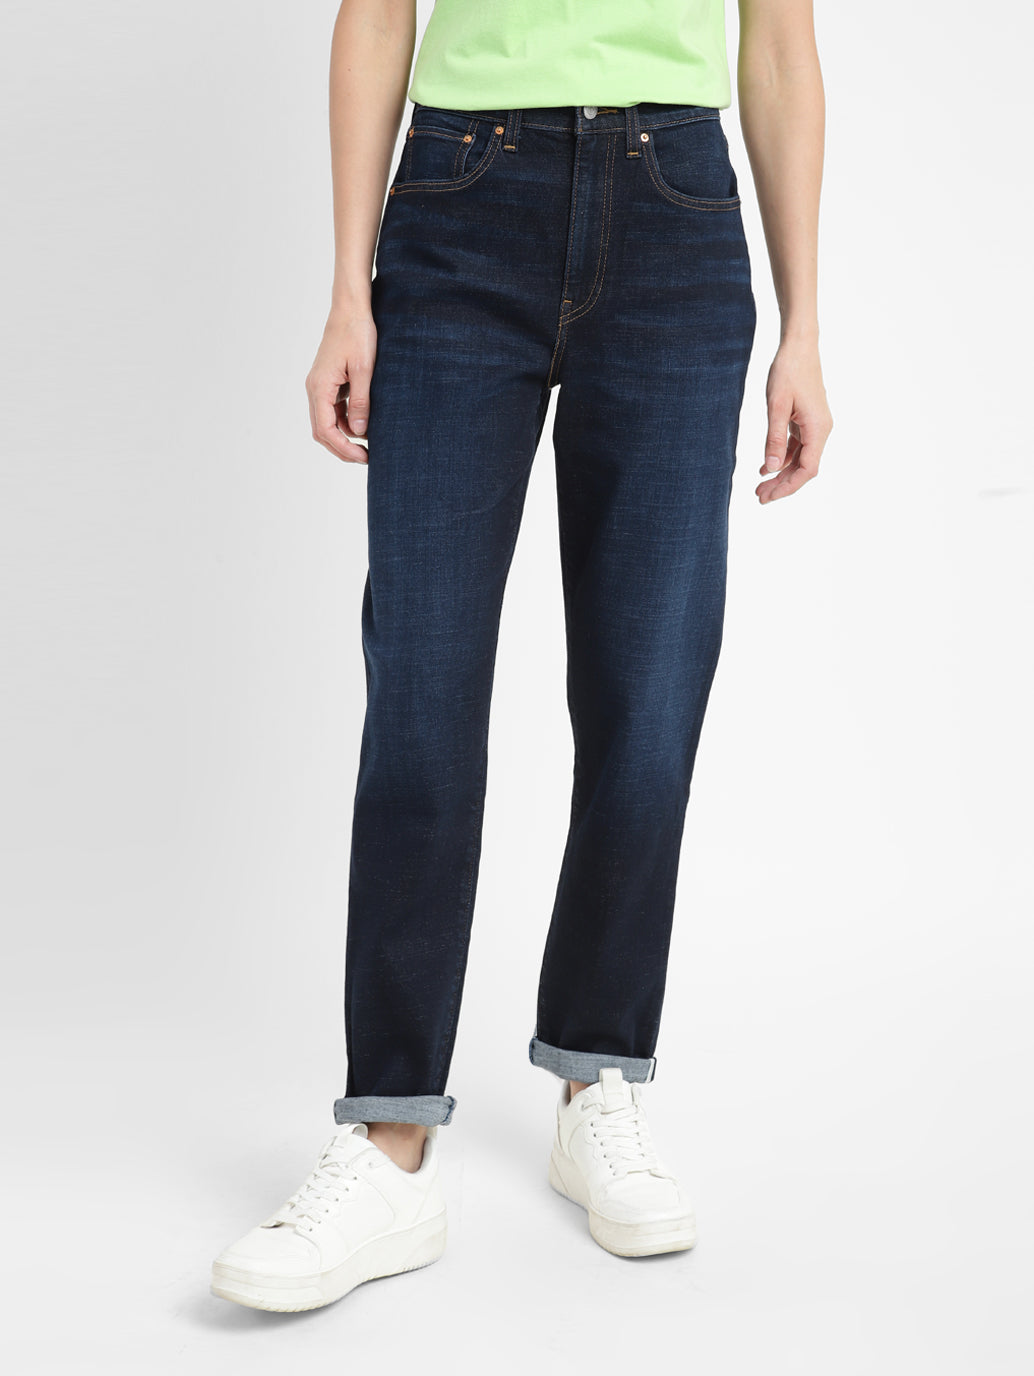 LEVI'S Womens High Waisted Straight Jeans